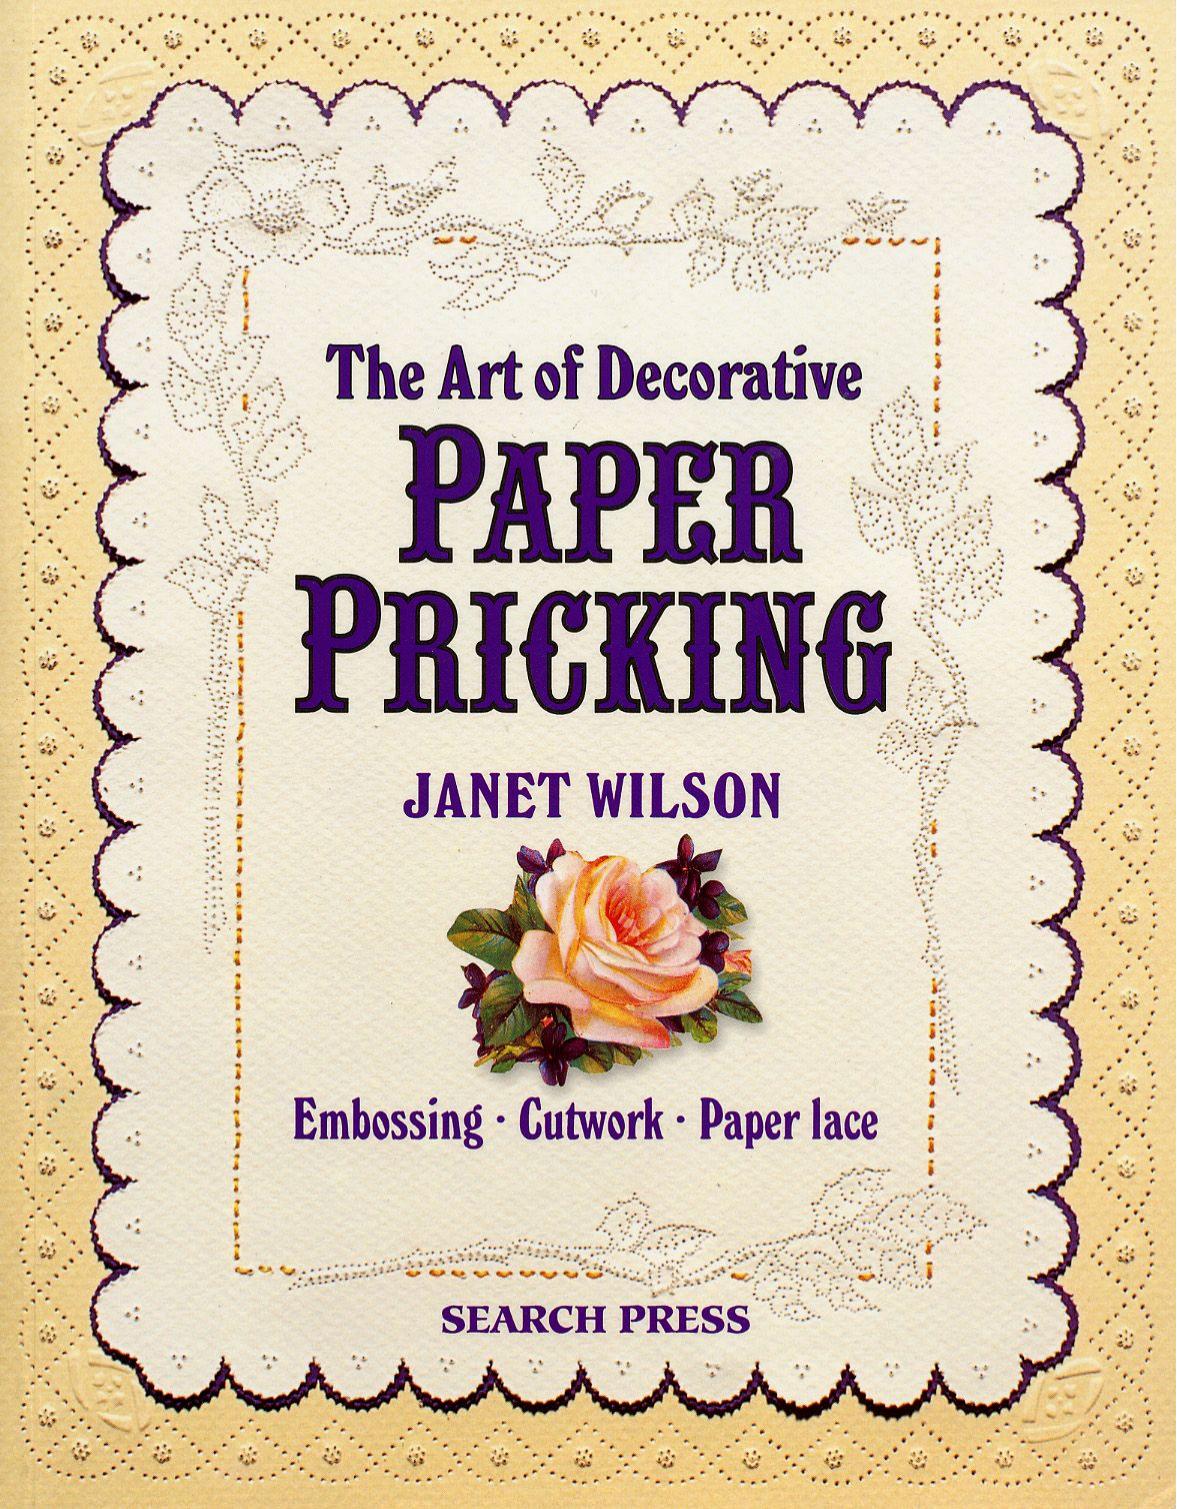 The Art of Decorative Paper Pricking by Janet Wilson